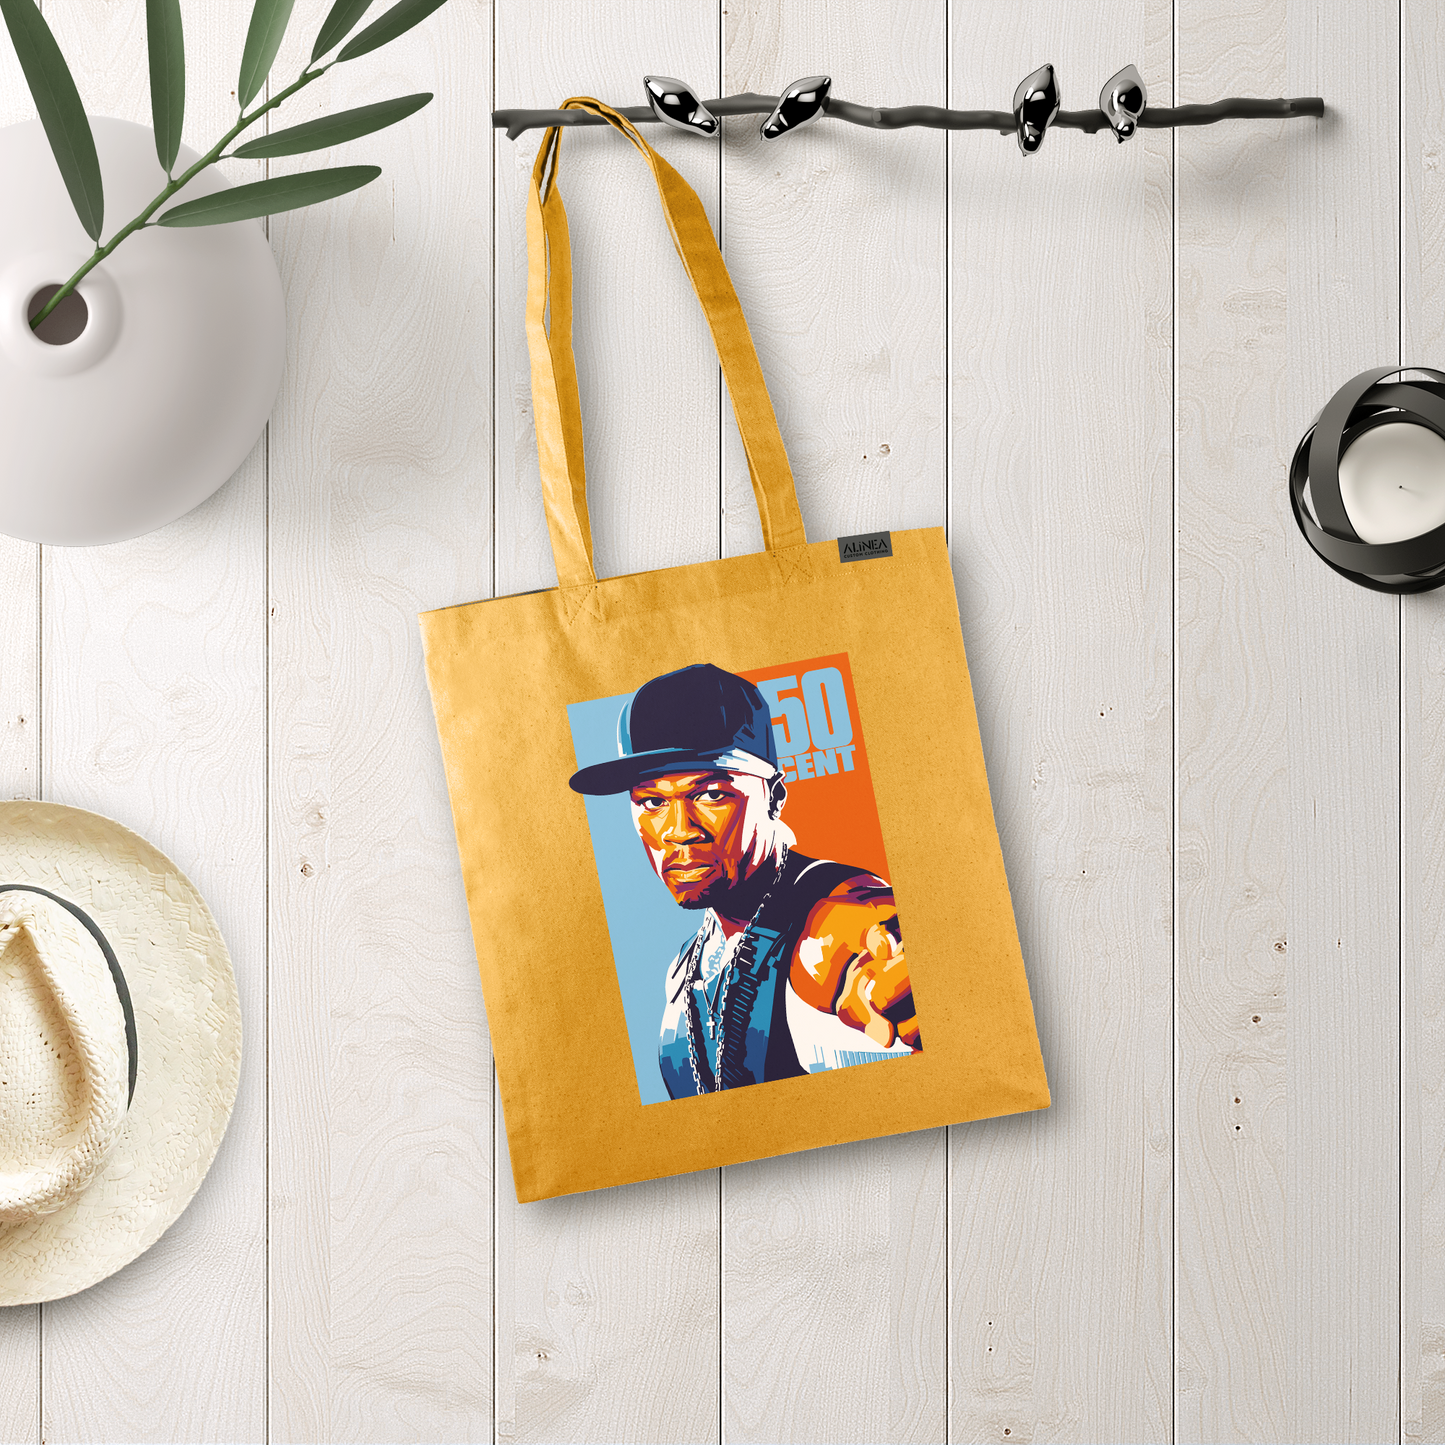 50 Cent Tote Bag